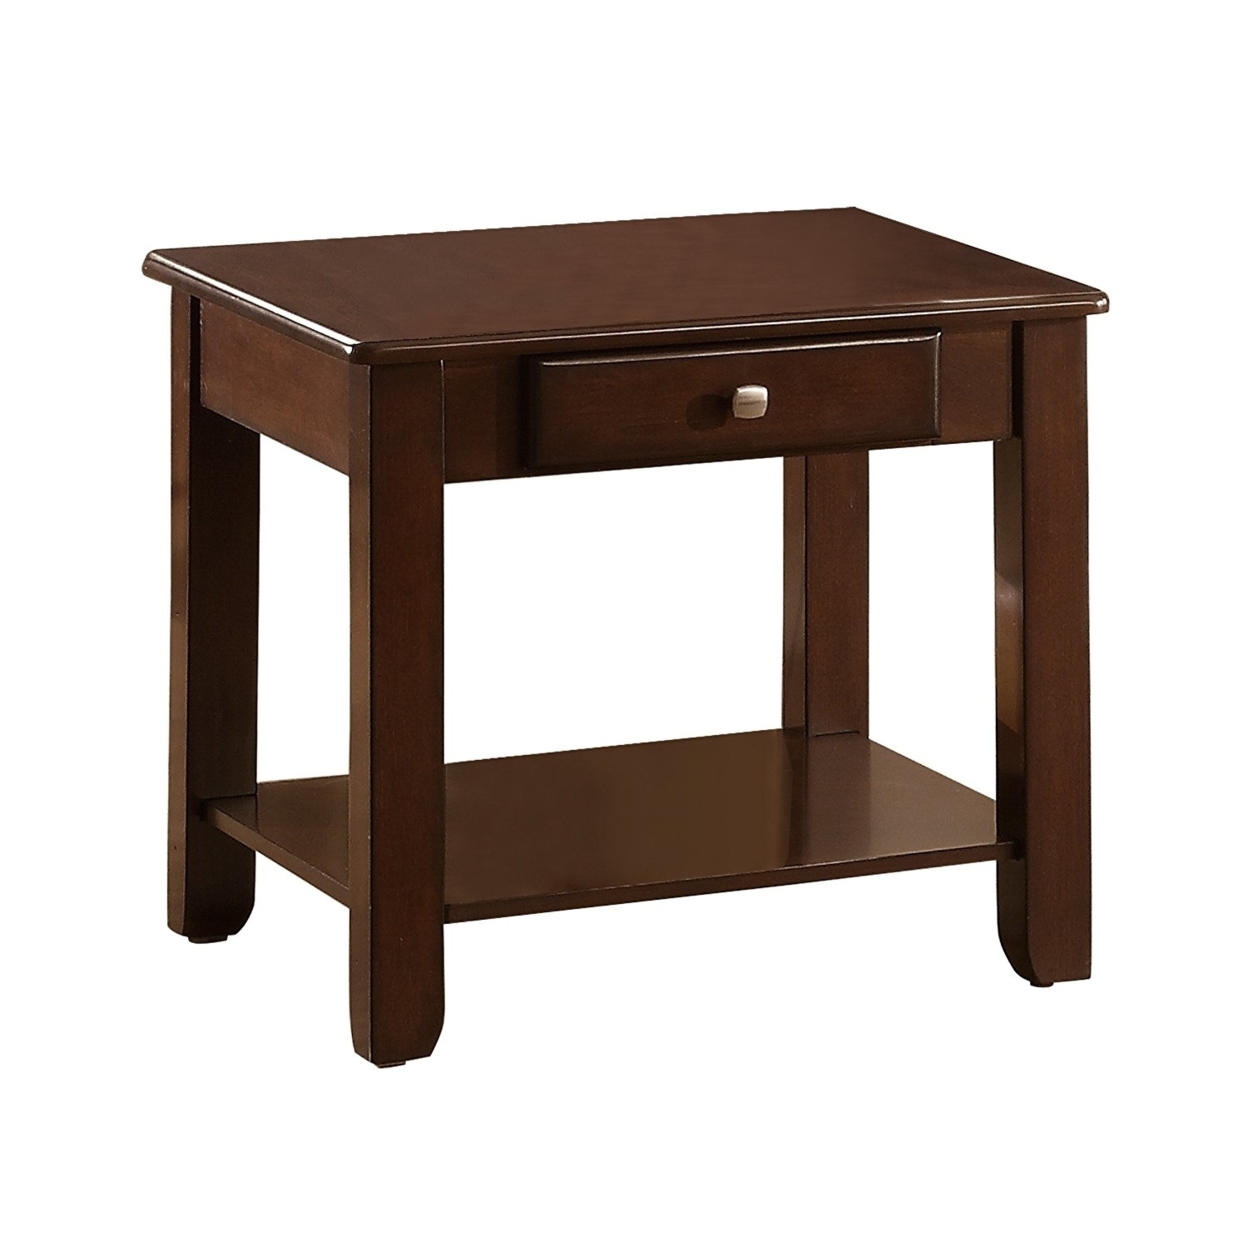 Solid Wooden End Table With Bottom Shelf & Drawer, Cherry Brown- Saltoro Sherpi